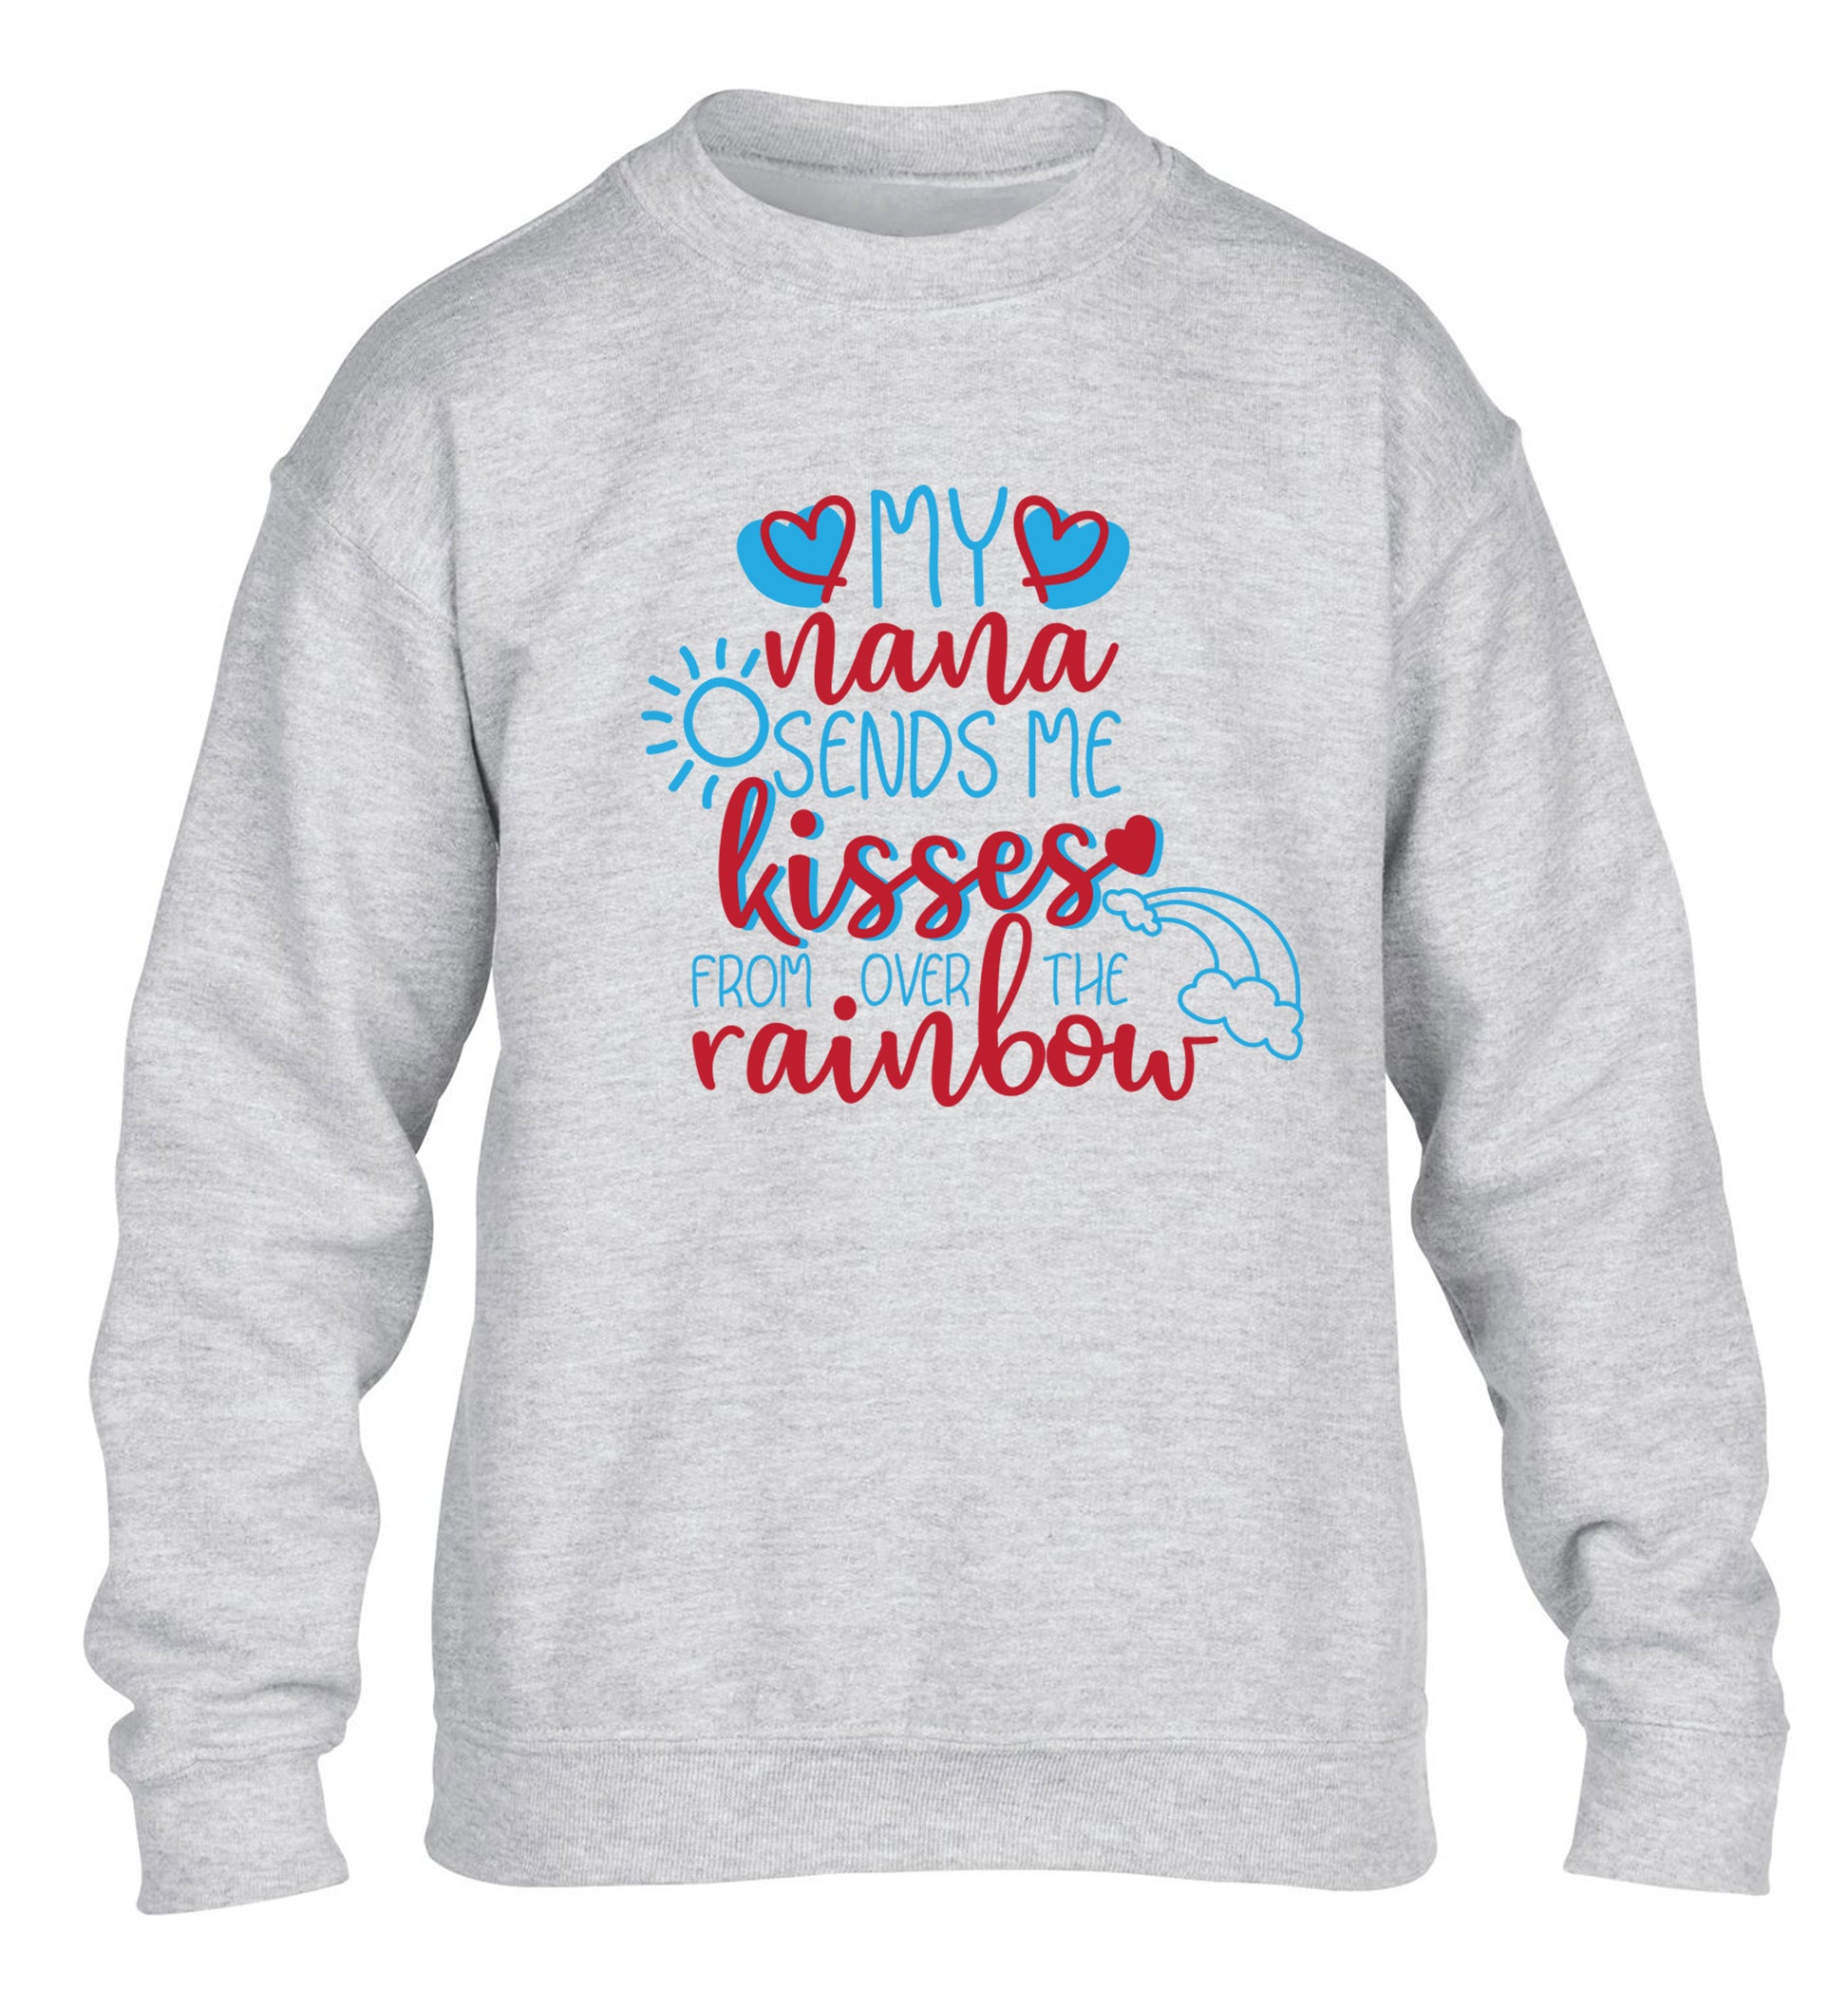 My nana sends me kisses from over the rainbow children's grey sweater 12-13 Years